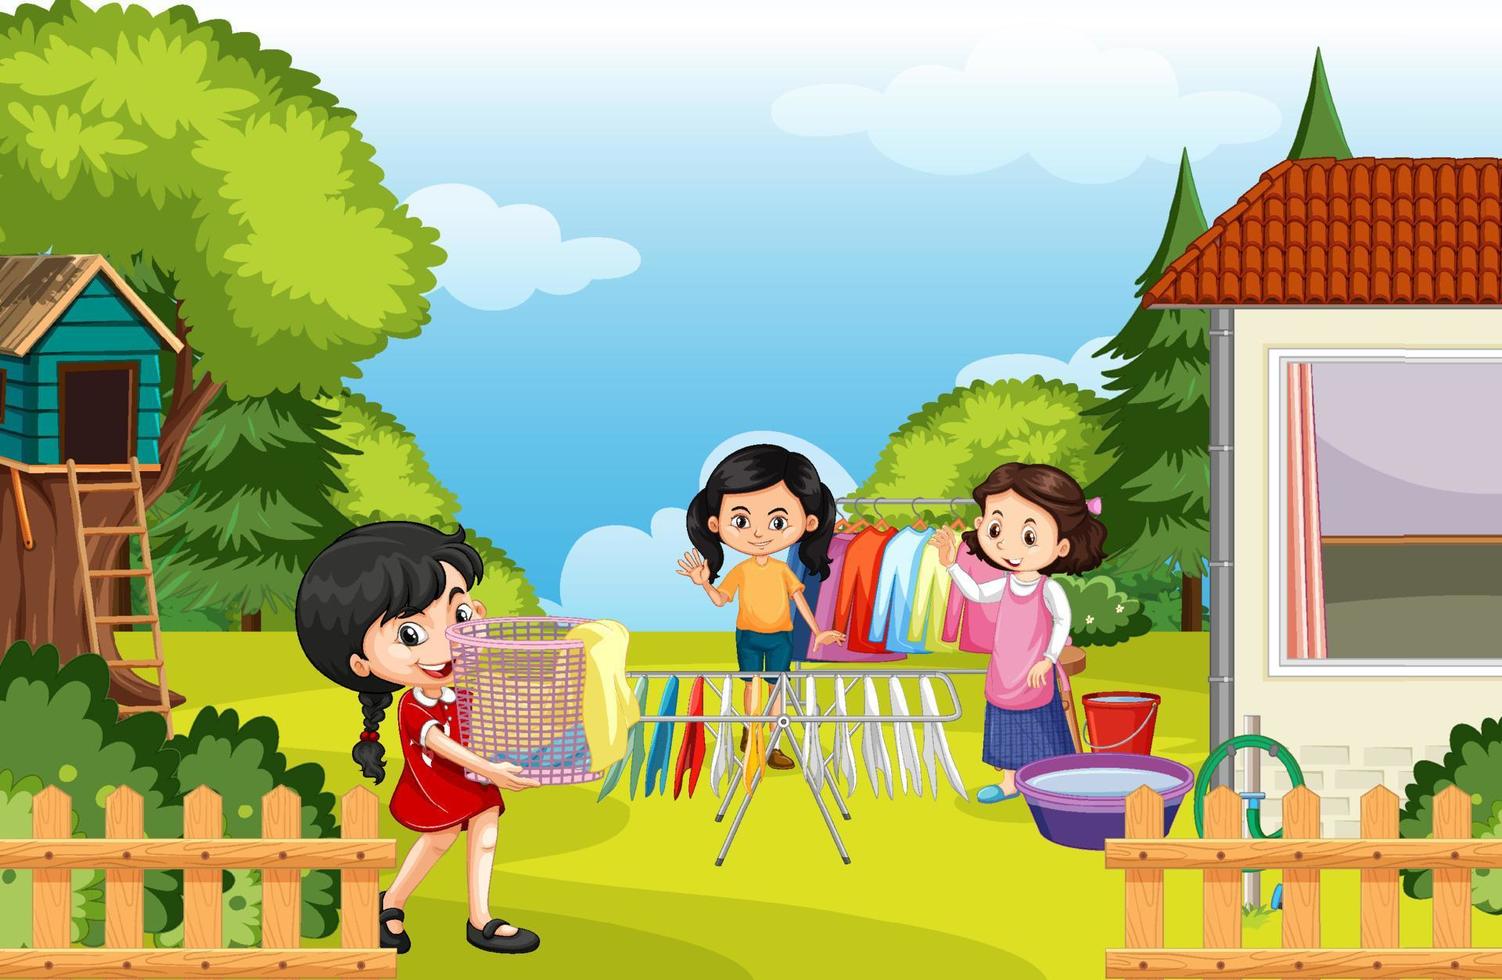 Scene of backyard with kids and fence vector